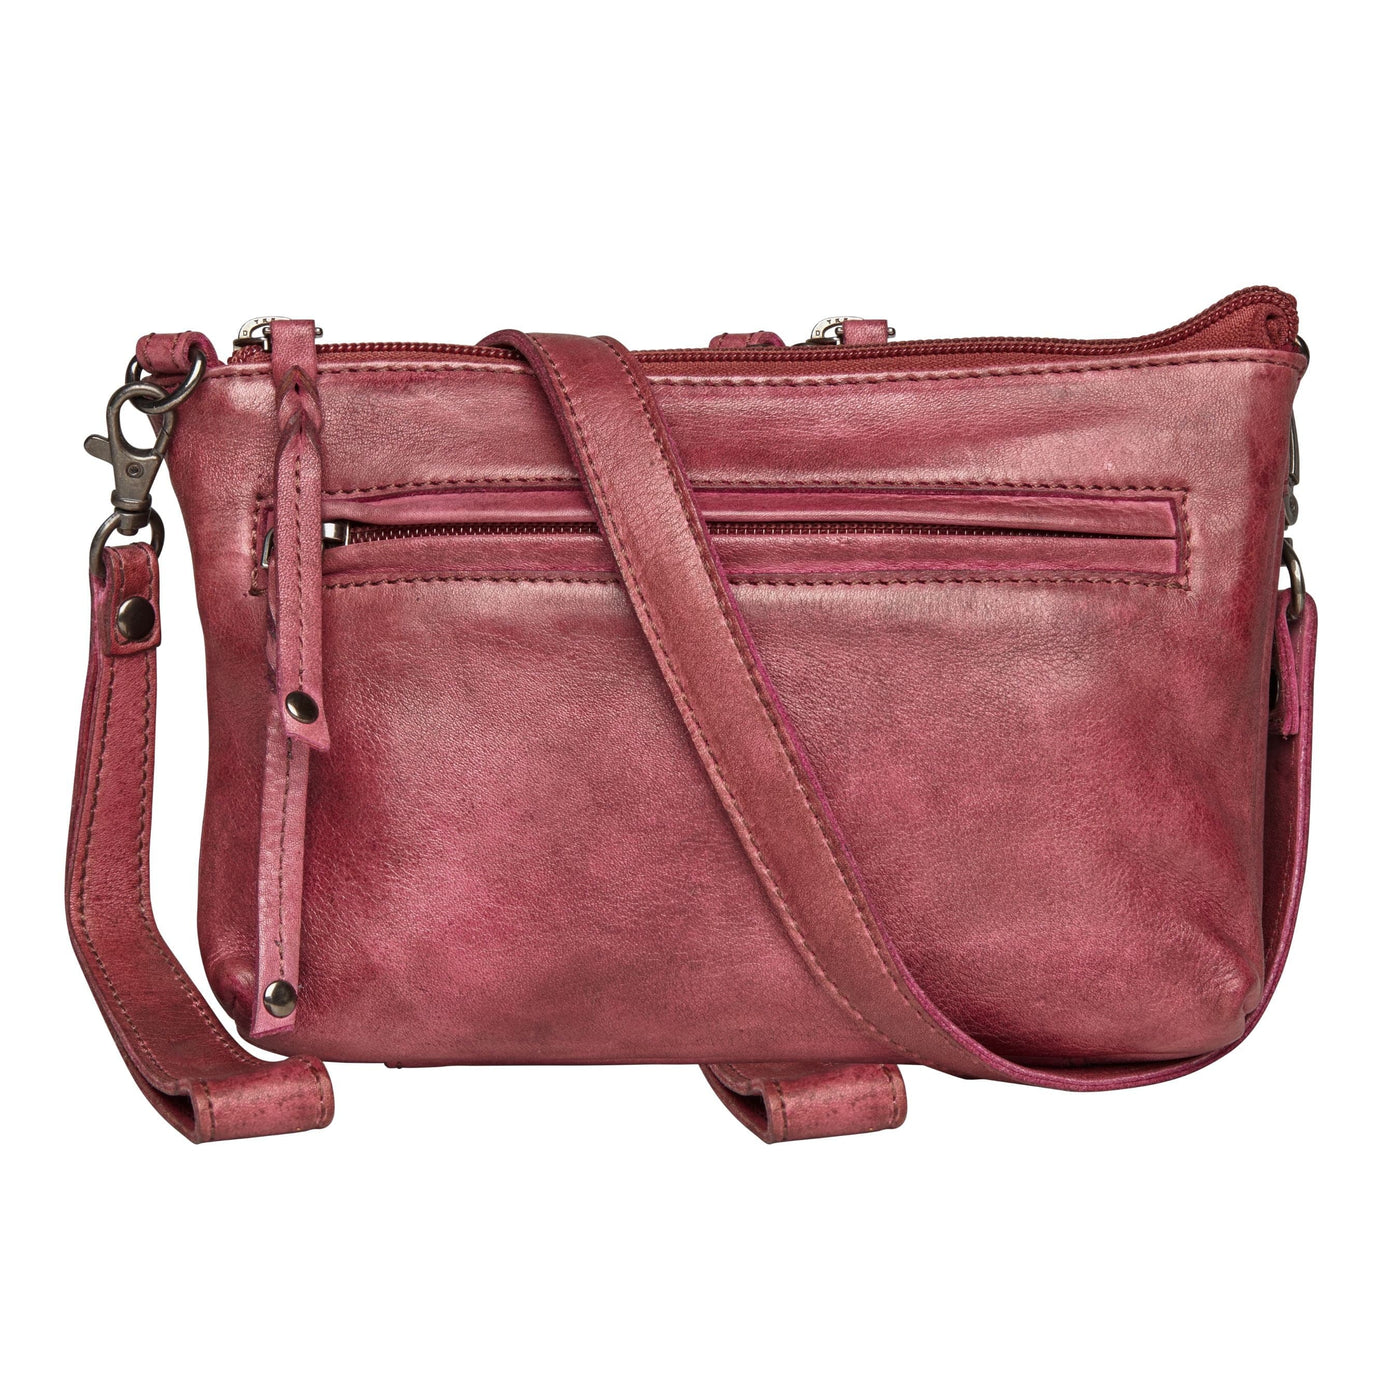 Concealed Carry Amelia leather crossbody bag - Locking Gun Bag - Conceal Carry for Women - Pistol Bag 